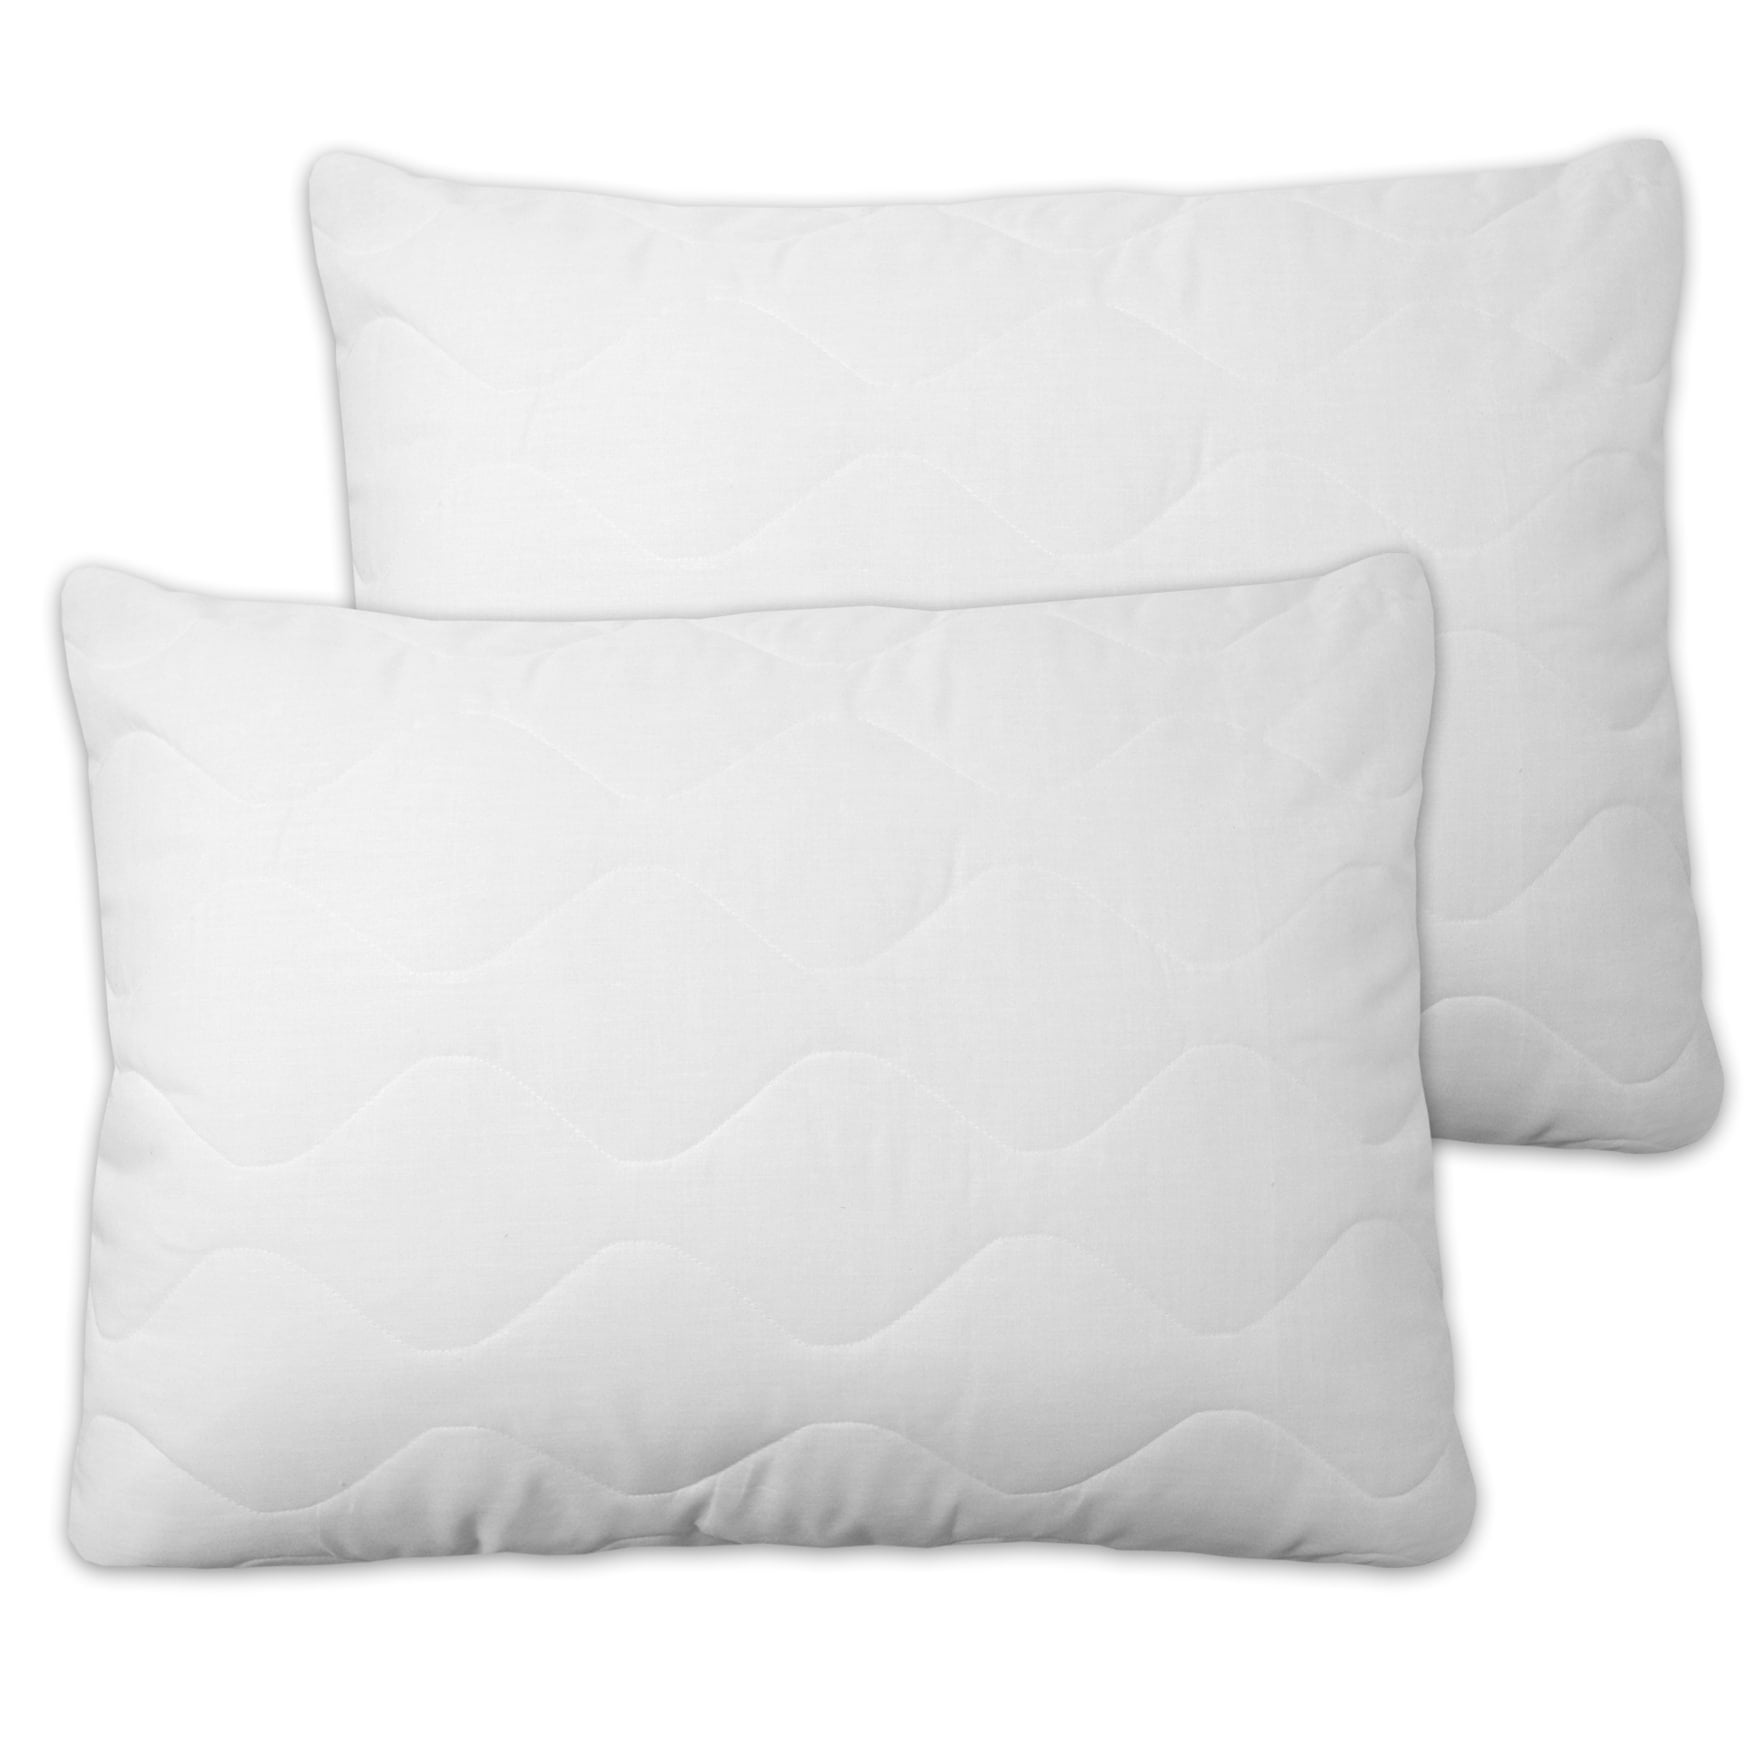 white Stanford Size One Pillow QUILTED Zippered Protector Sham 